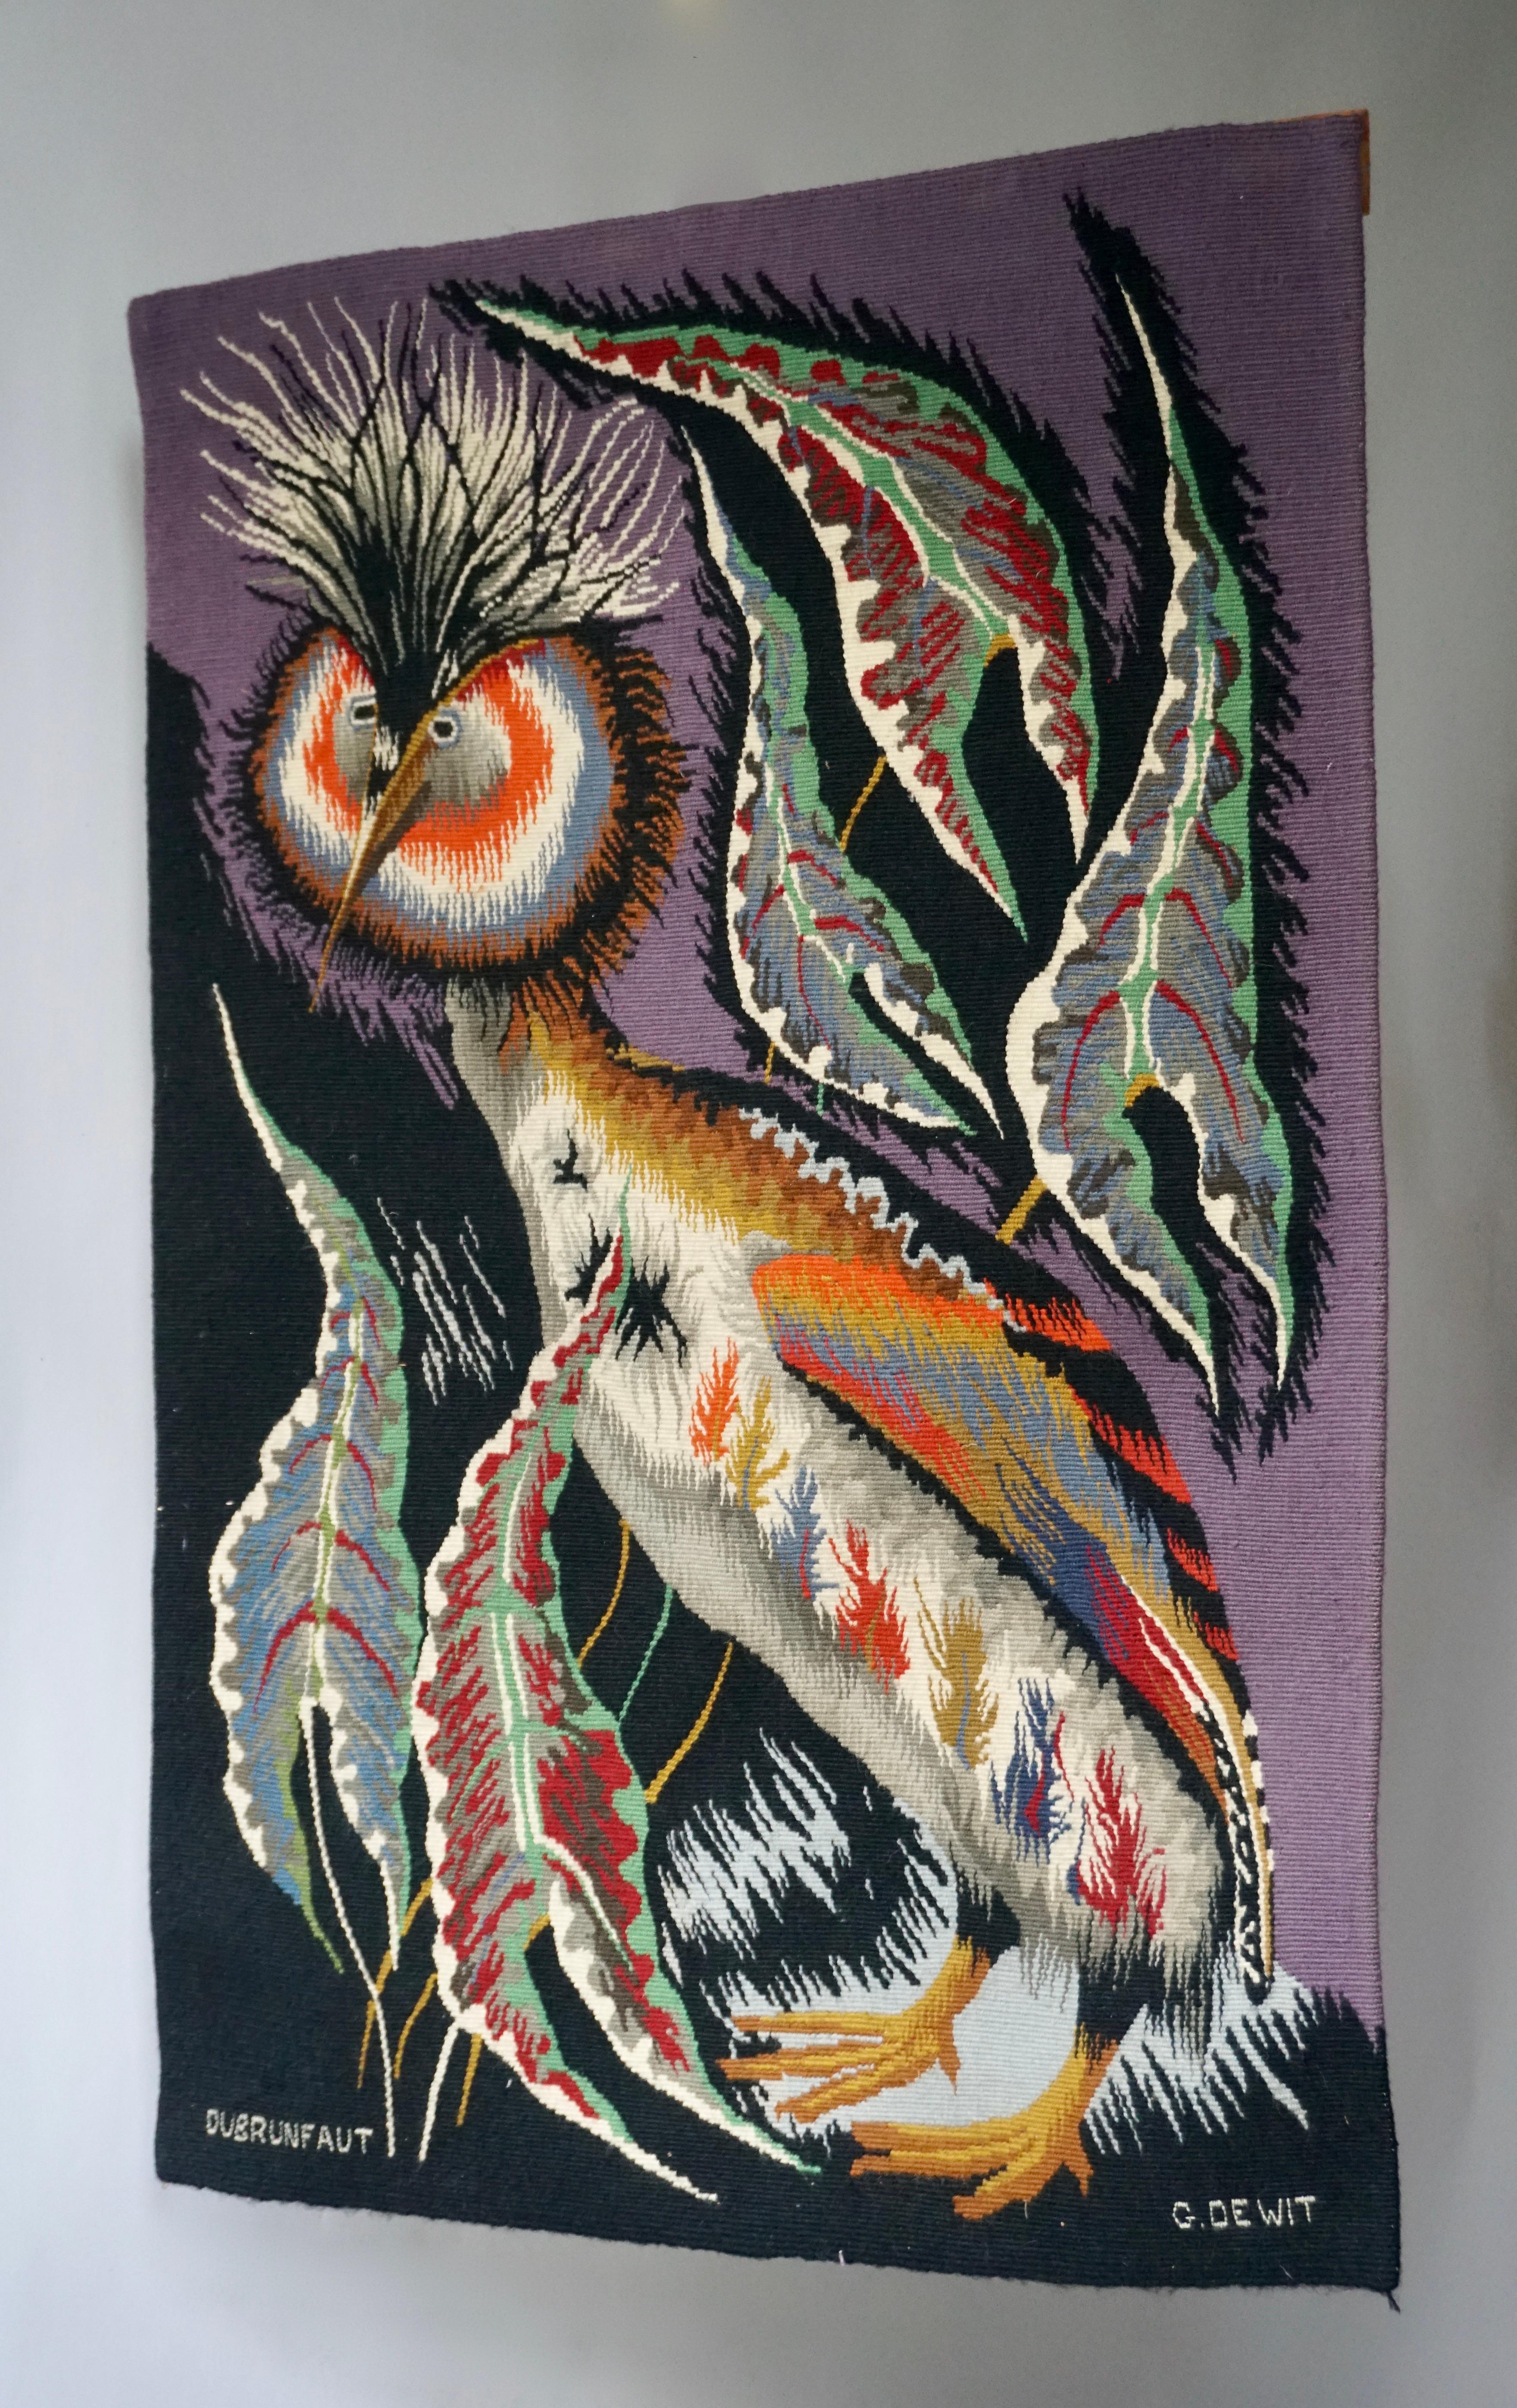 Rare and colorful tapestry of an ornamental crowned crane bird with black and purple background.
Signed by renown Belgian artist Edmont Dubrunfaut, circa 1950.